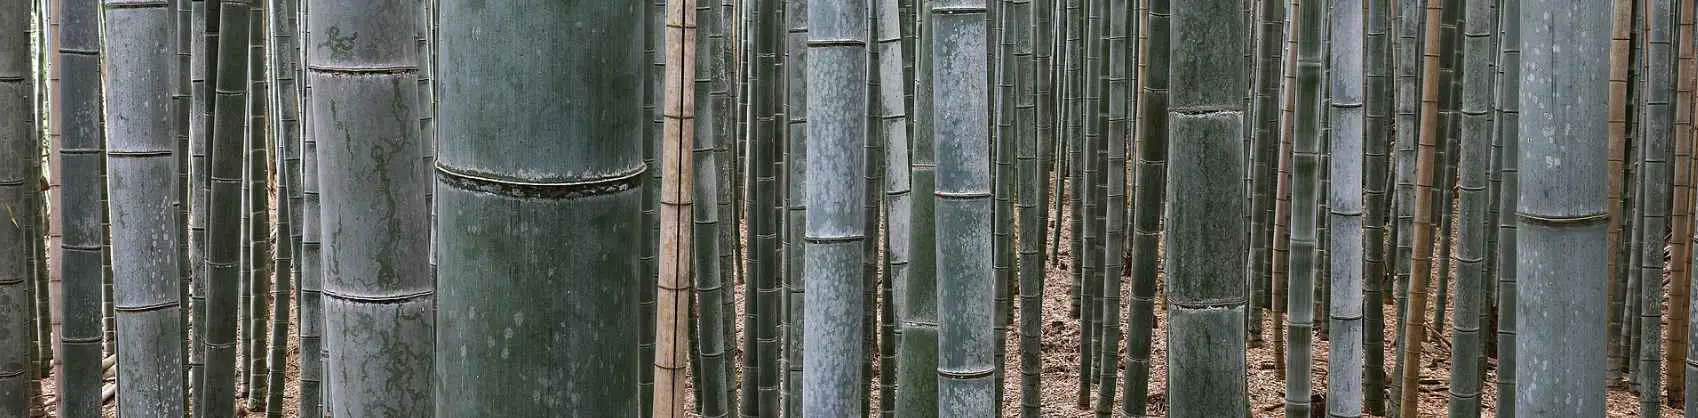 Bamboo forest banner